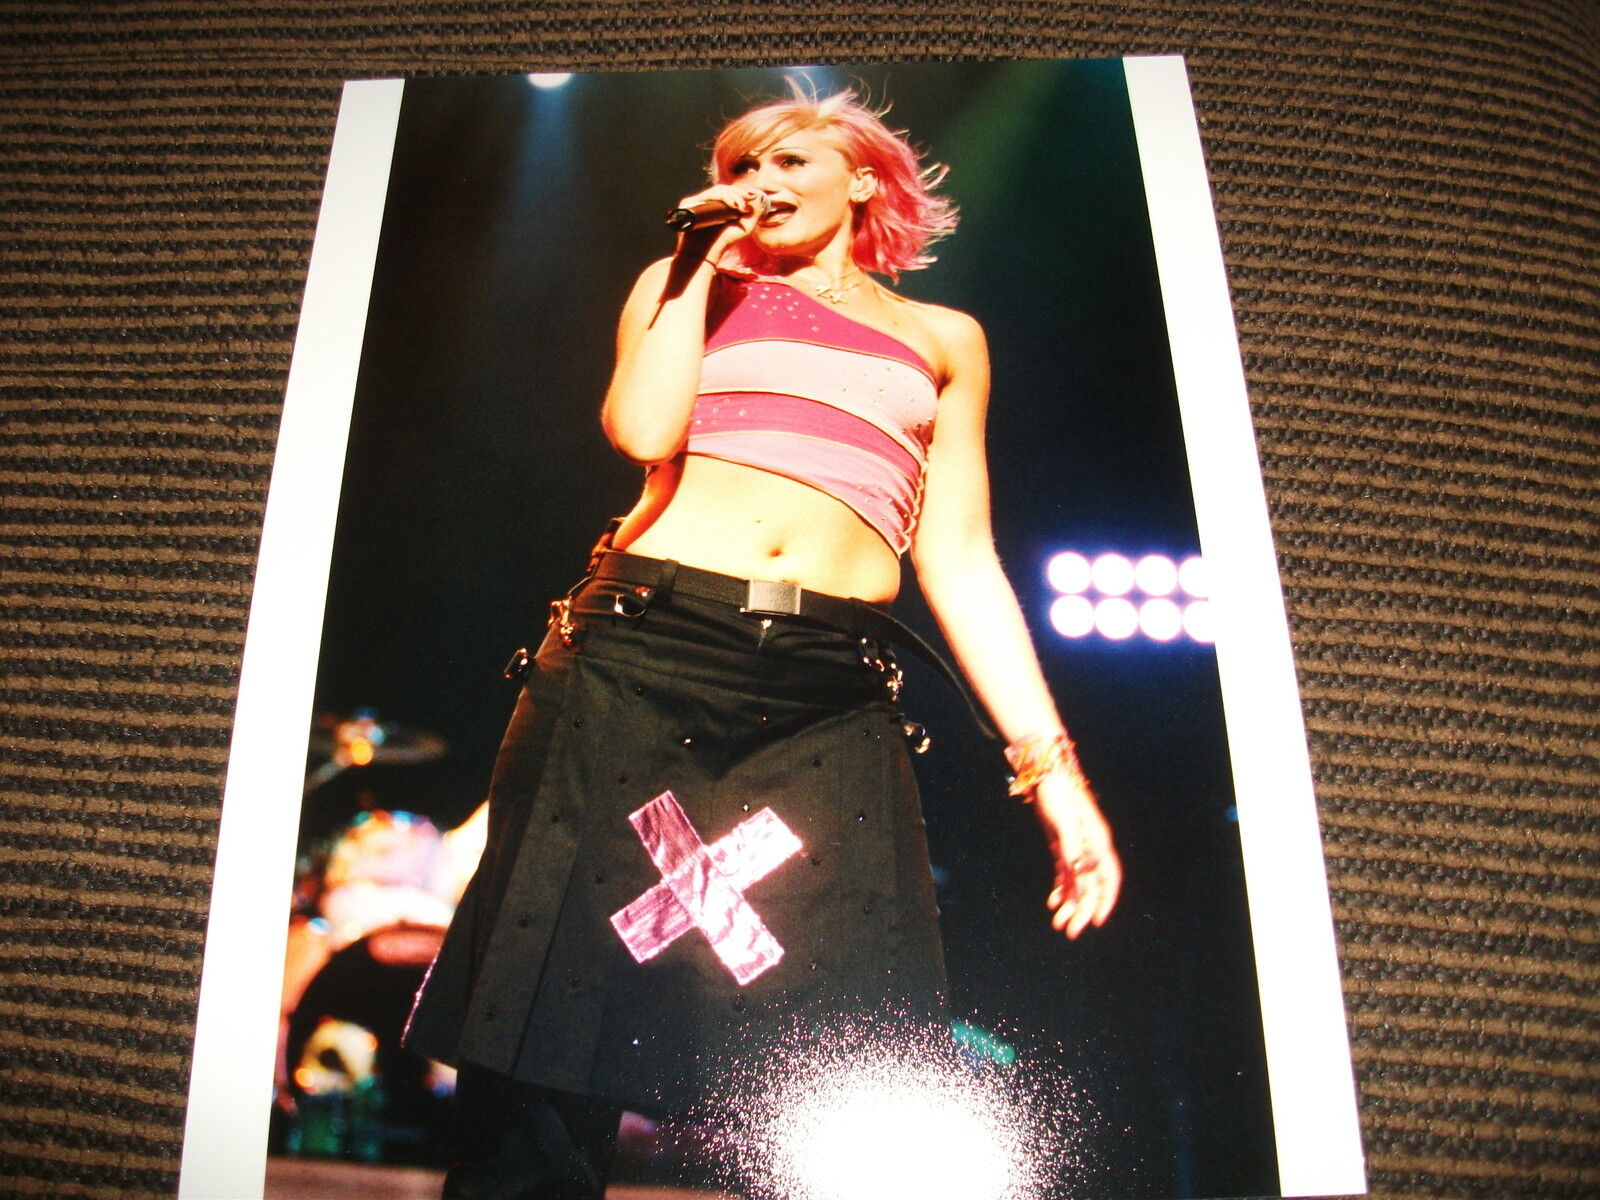 Gwen Stefani No Doubt Color 8x10 Photo Poster painting Music Sexy Promo Rare Live